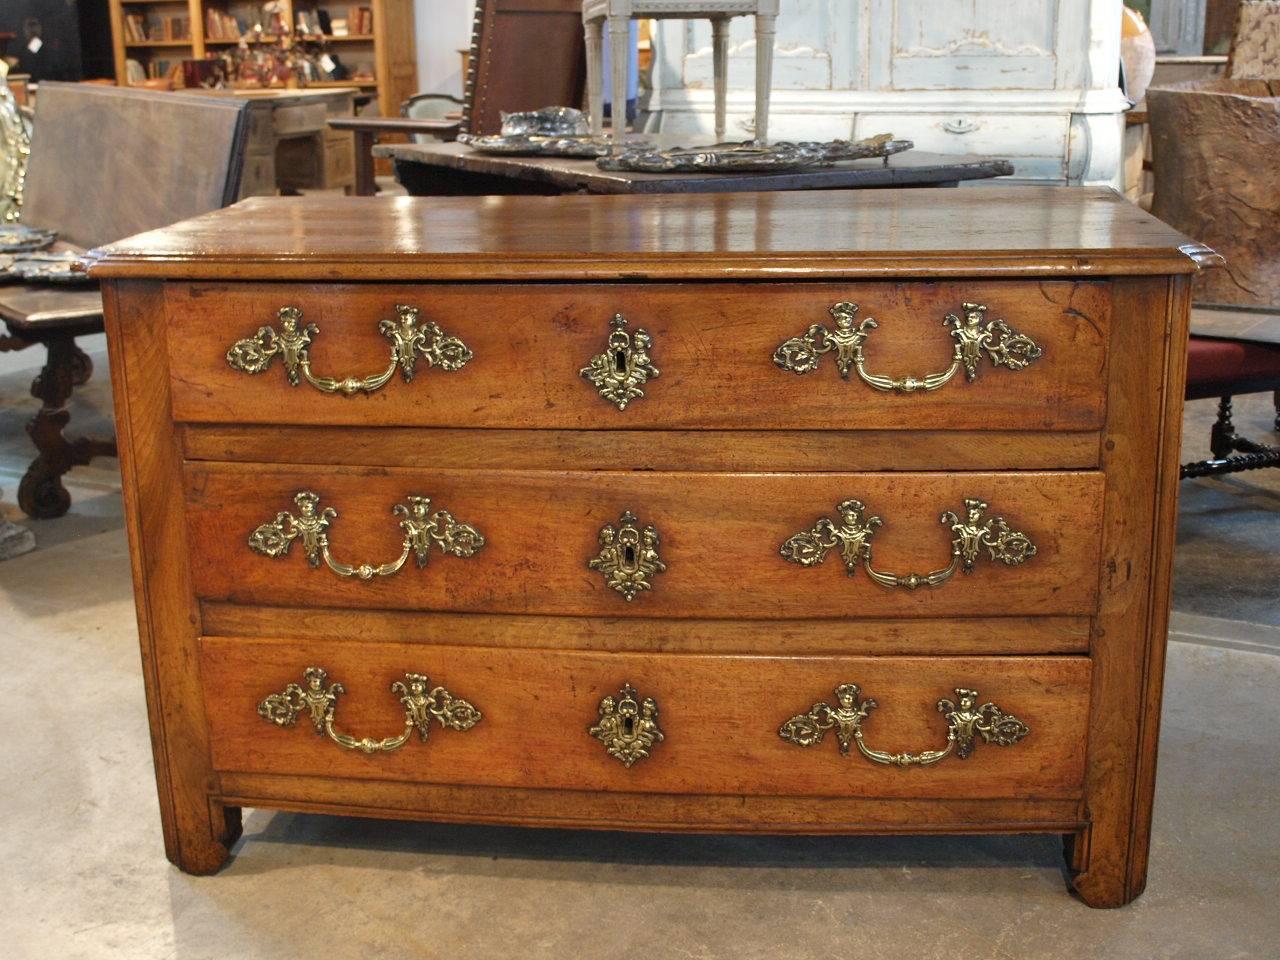 A very fine French Louis XIV period commode. Masterly crafted in walnut with original drawer pulls and locks. Wonderful patina and graining luminous and rich.